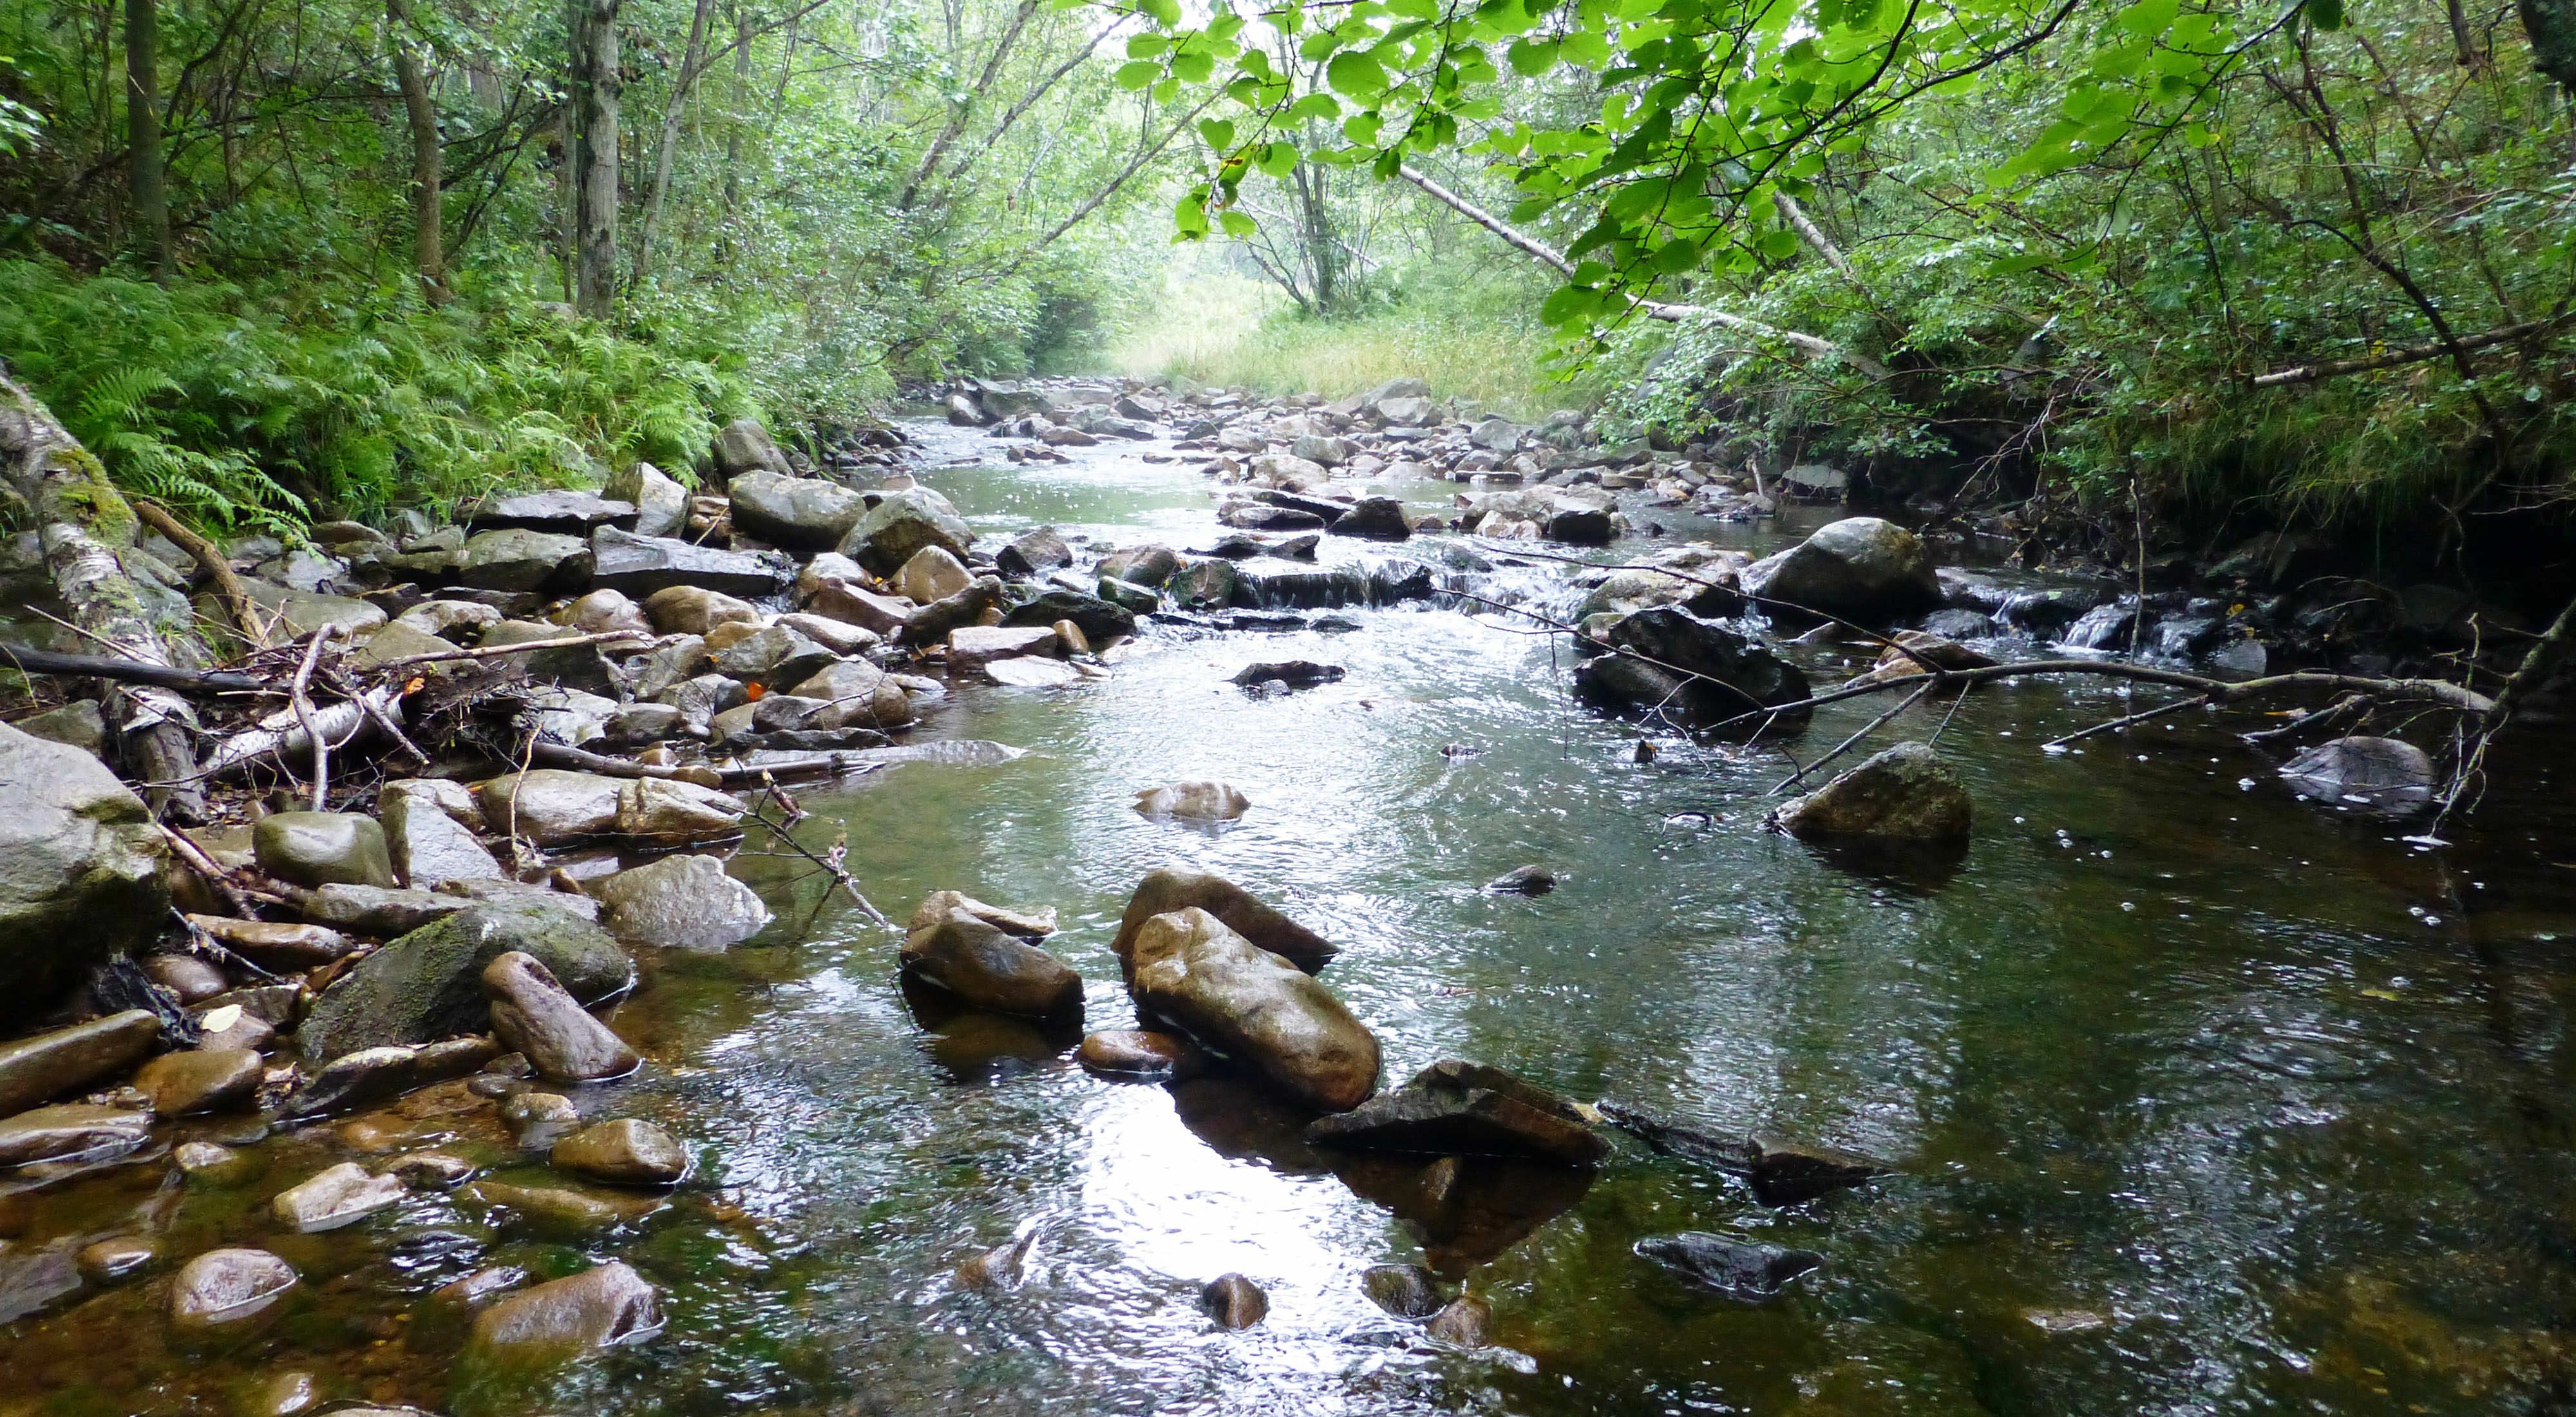 Low angle view of a shallow, narrow creek flowing over large rocks and stones. The creek extends into the distance curving between grassy banks. Tall trees shade the creek in the foreground.